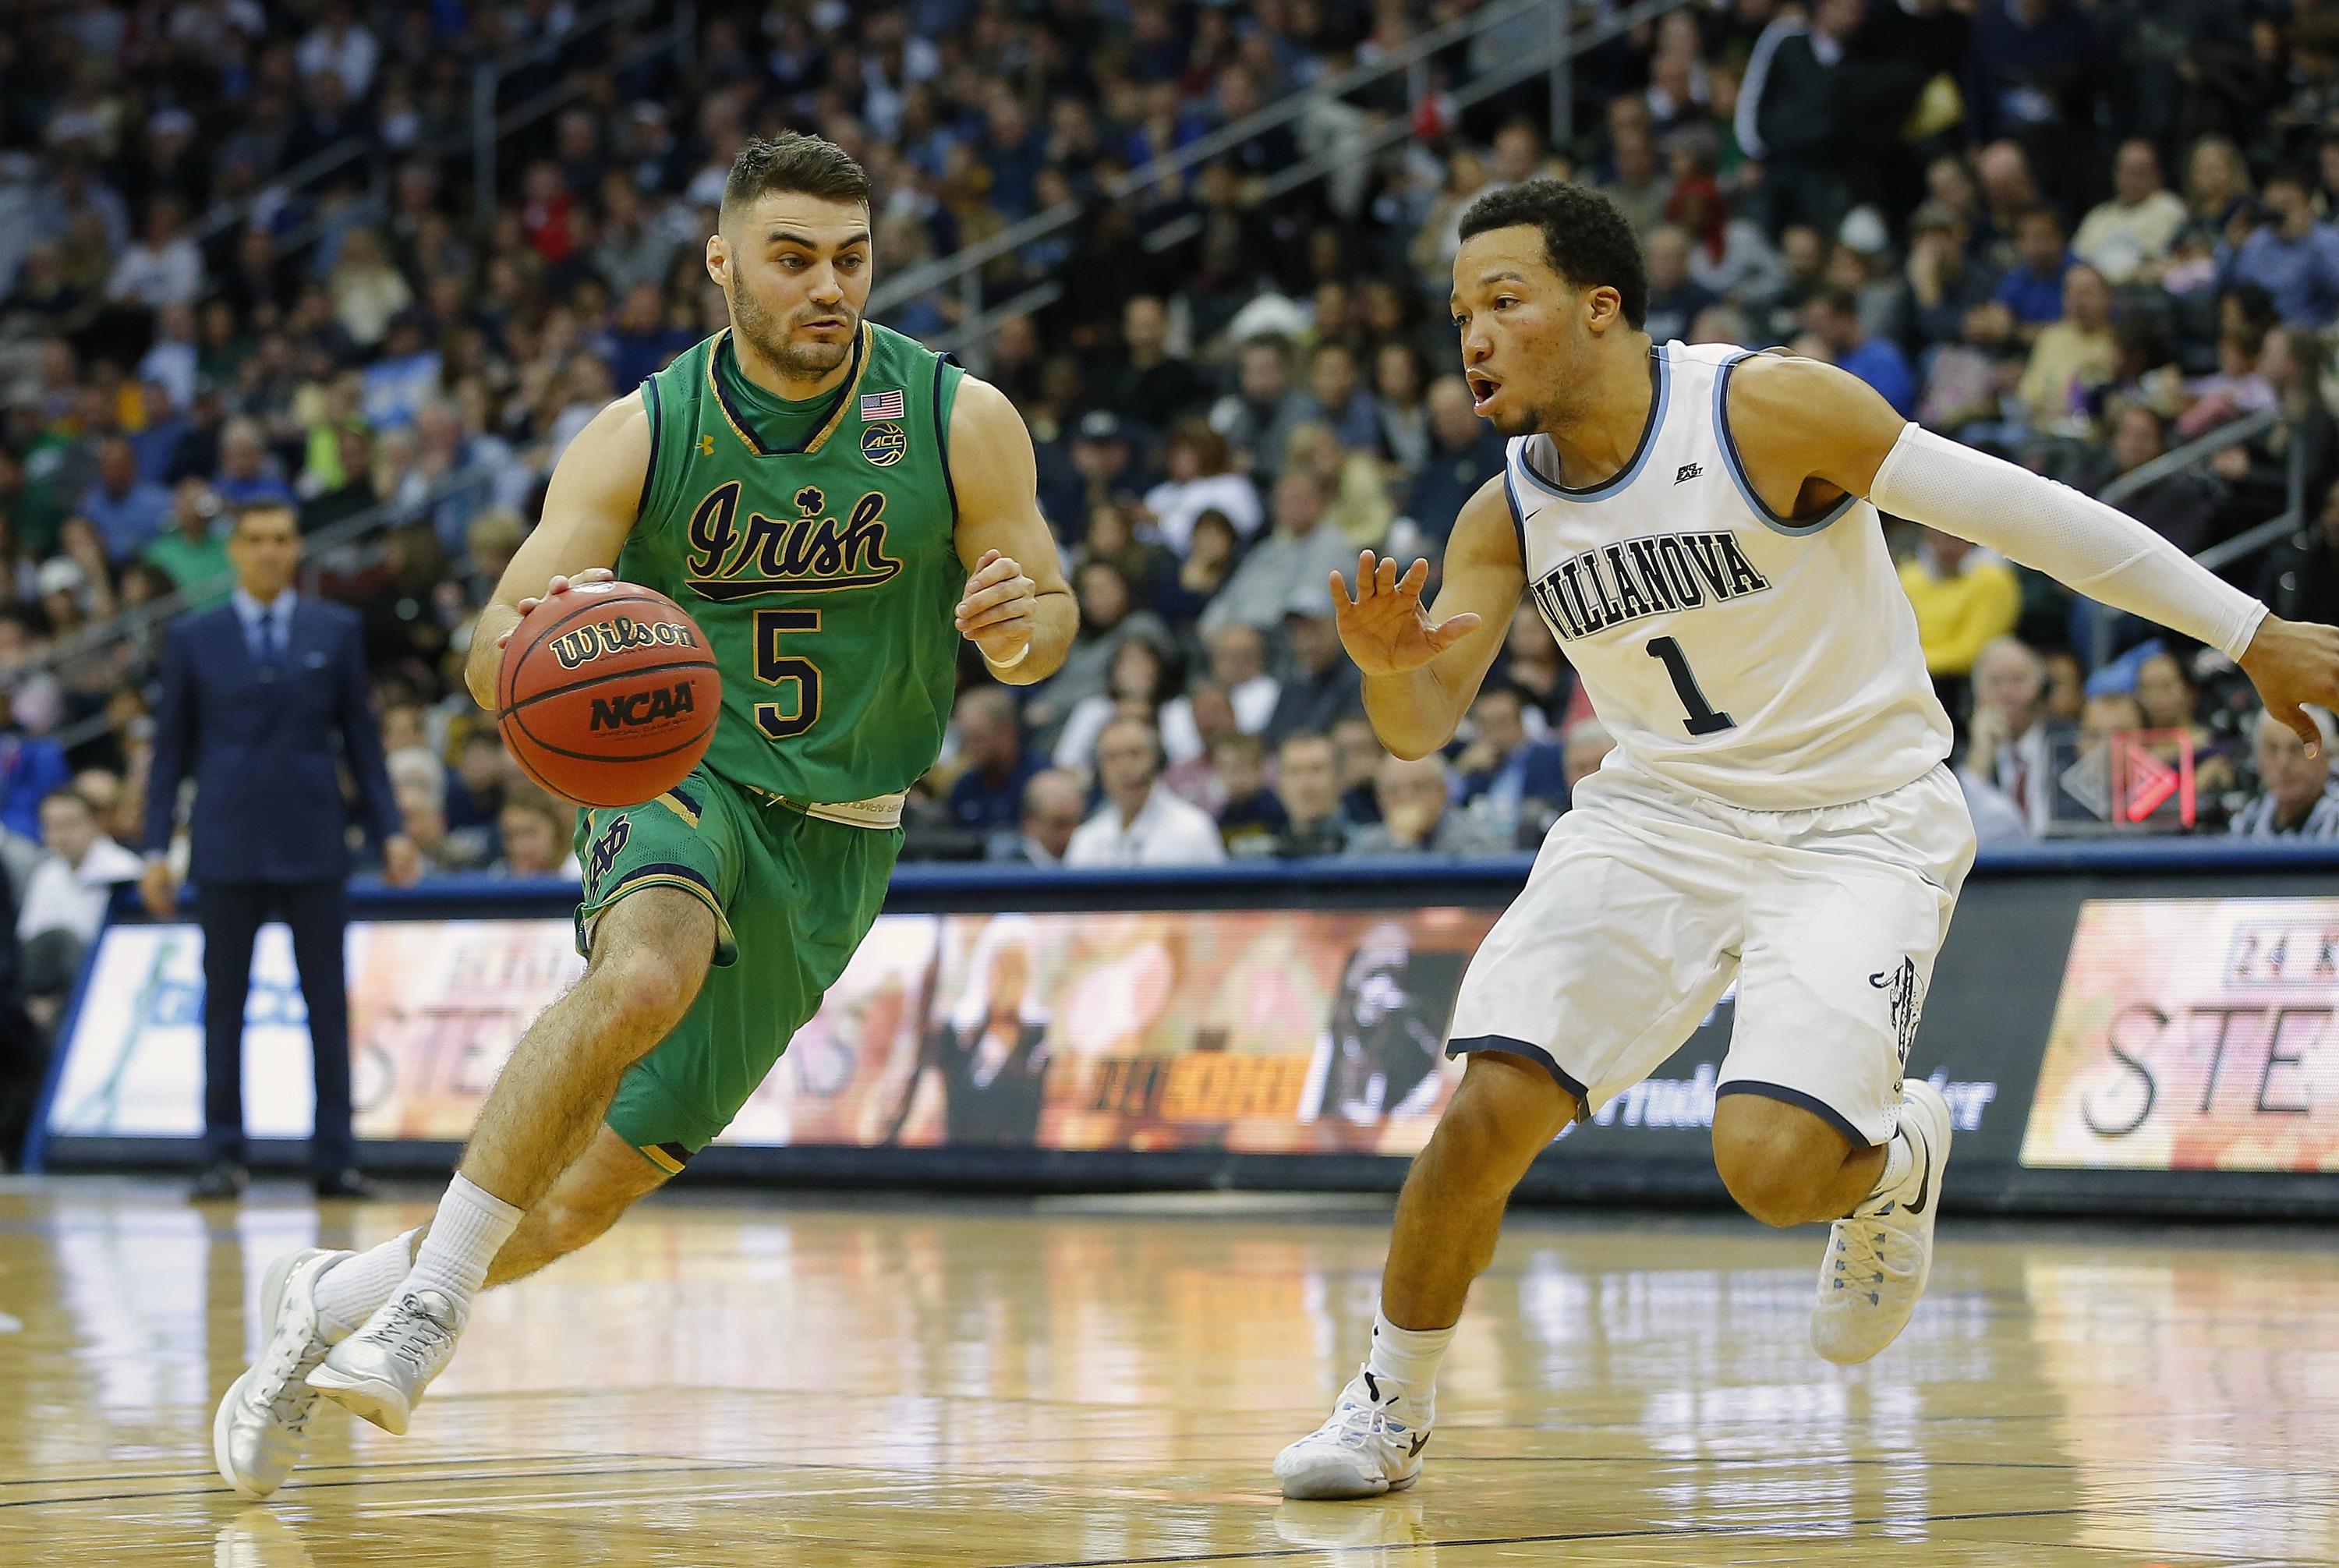 NEWARK, NJ - DECEMBER 10: Matt Farrell #5 of the Notre Dame Fighting Irish drives to the basket as Jalen Brunson #1 of the Villanova Wildcats defends during the second half of a college basketball game at Prudential Center on December 10, 2016 in Newark, New Jersey. Villanova defeated Notre Dame 74-66. (Photo by Rich Schultz/Getty Images)